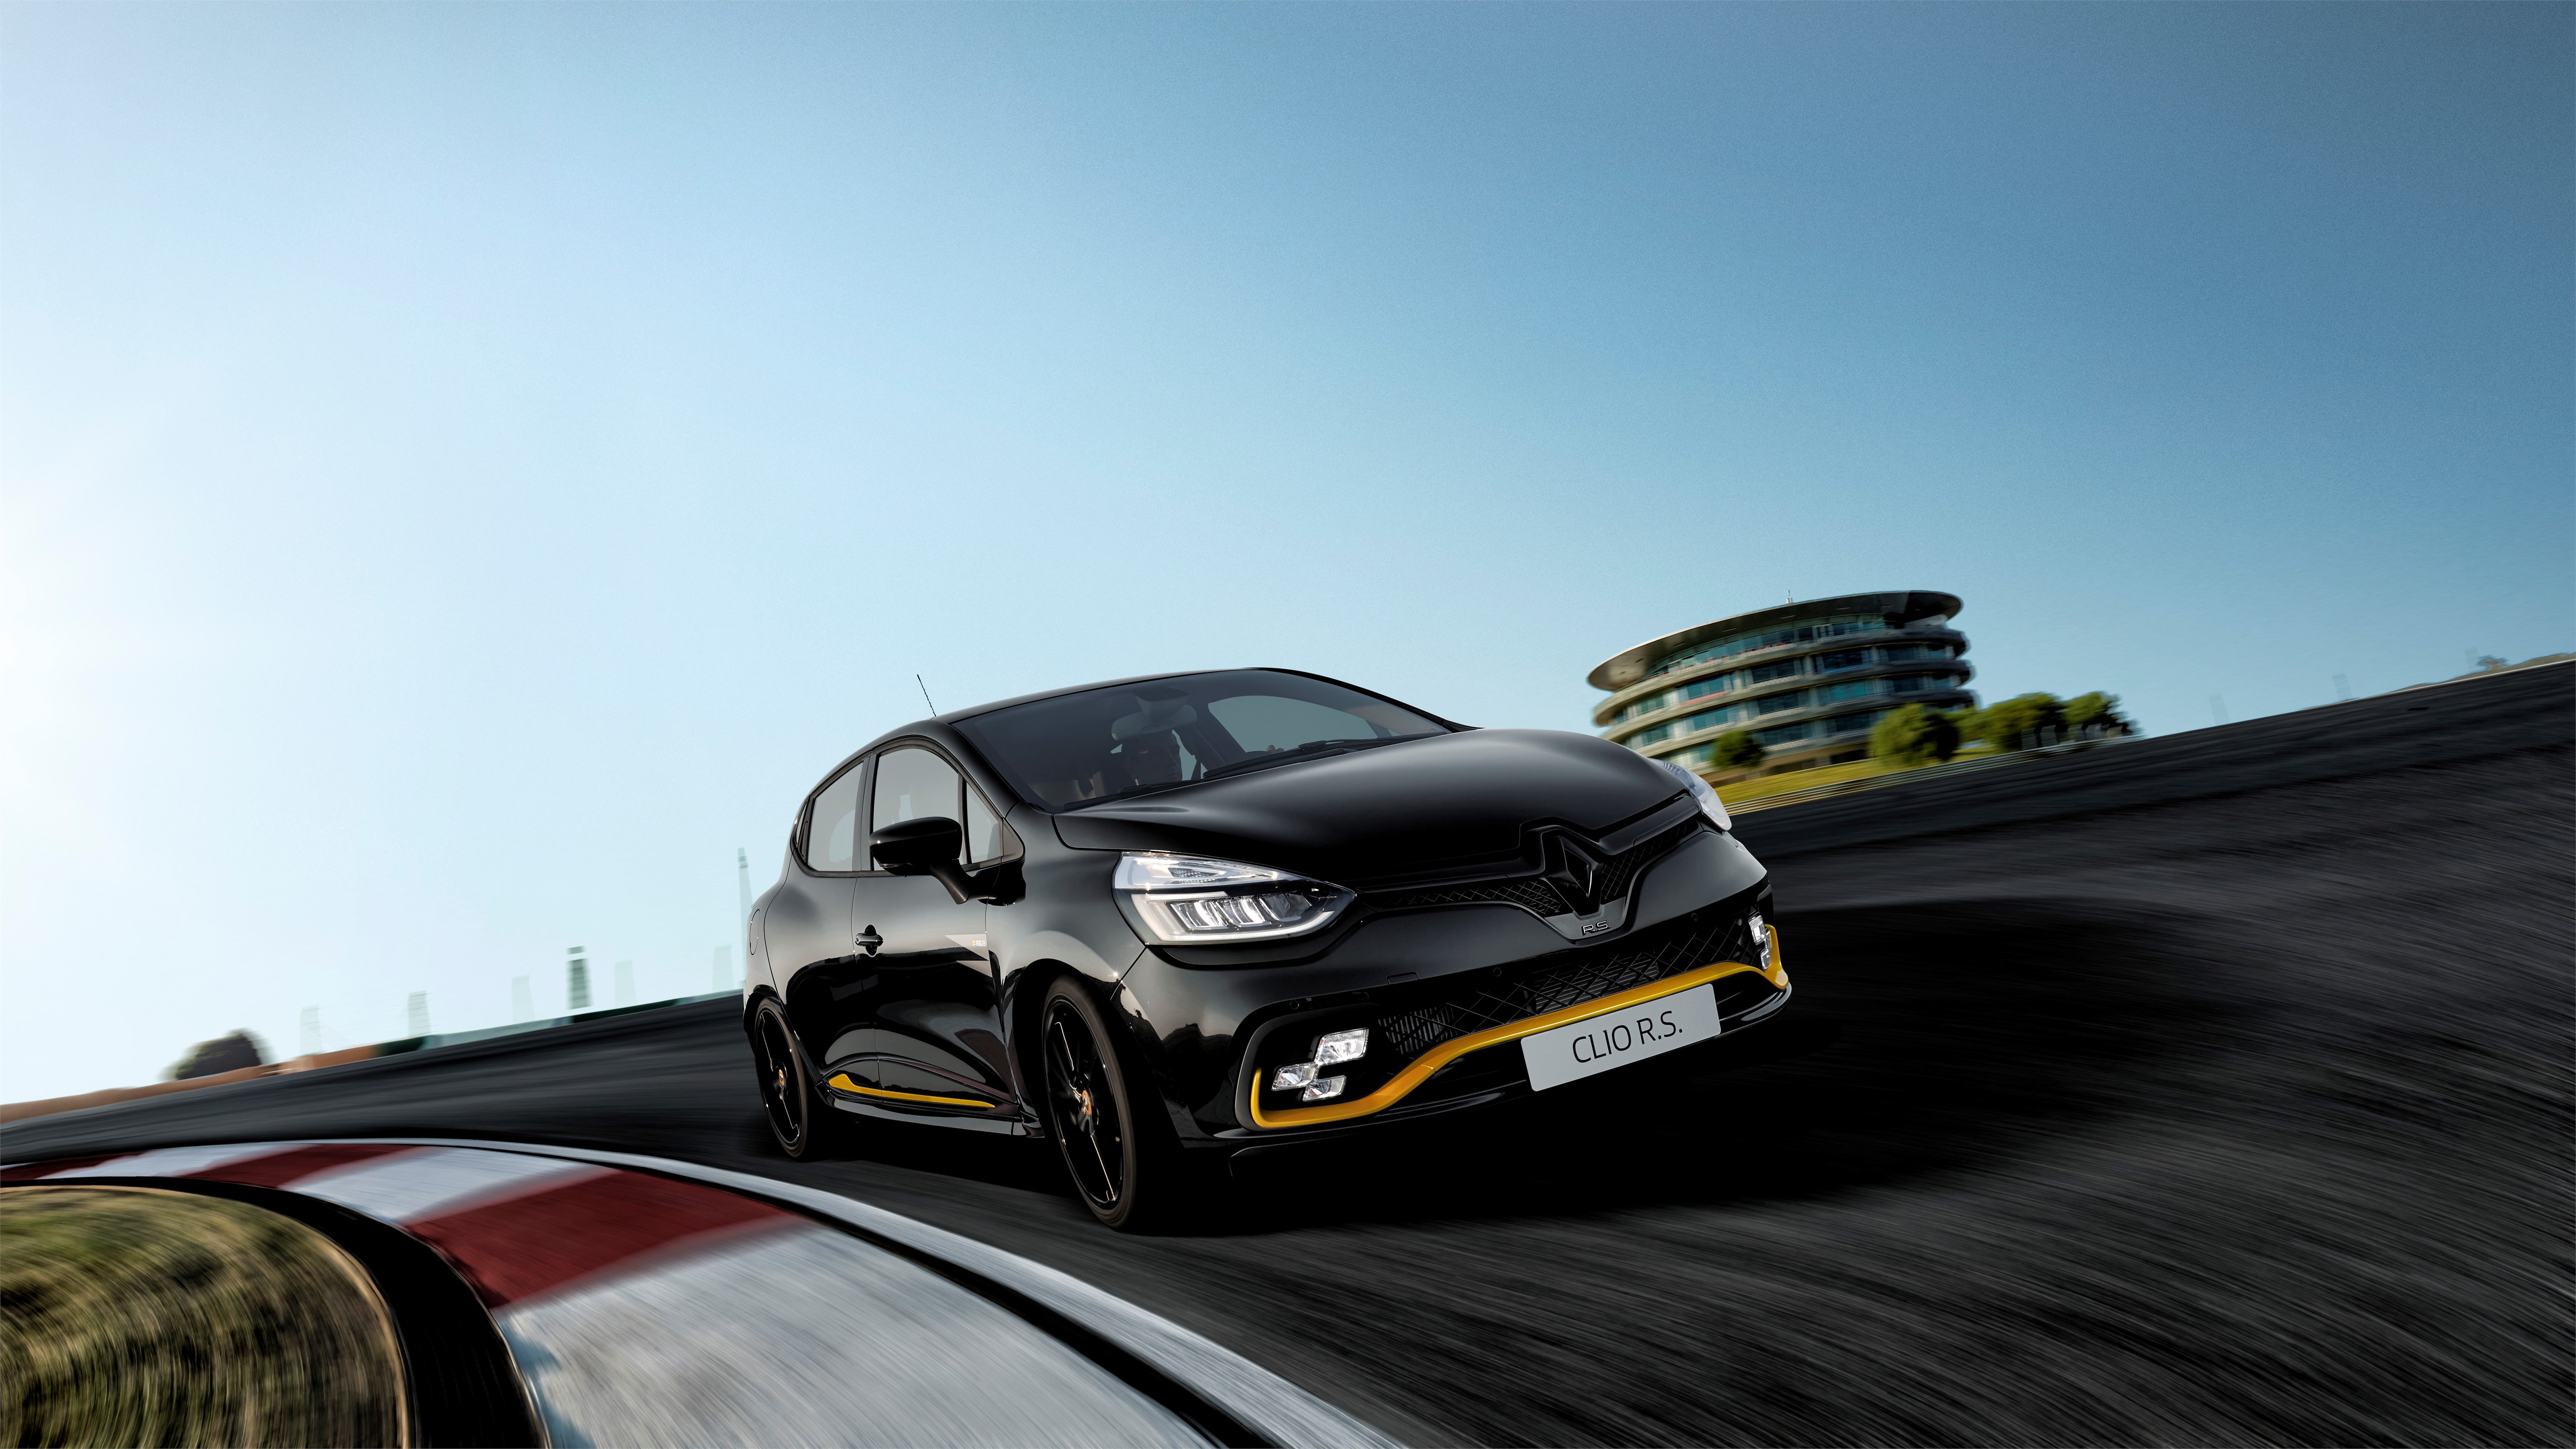 Renault Clio R.S. mod restyling